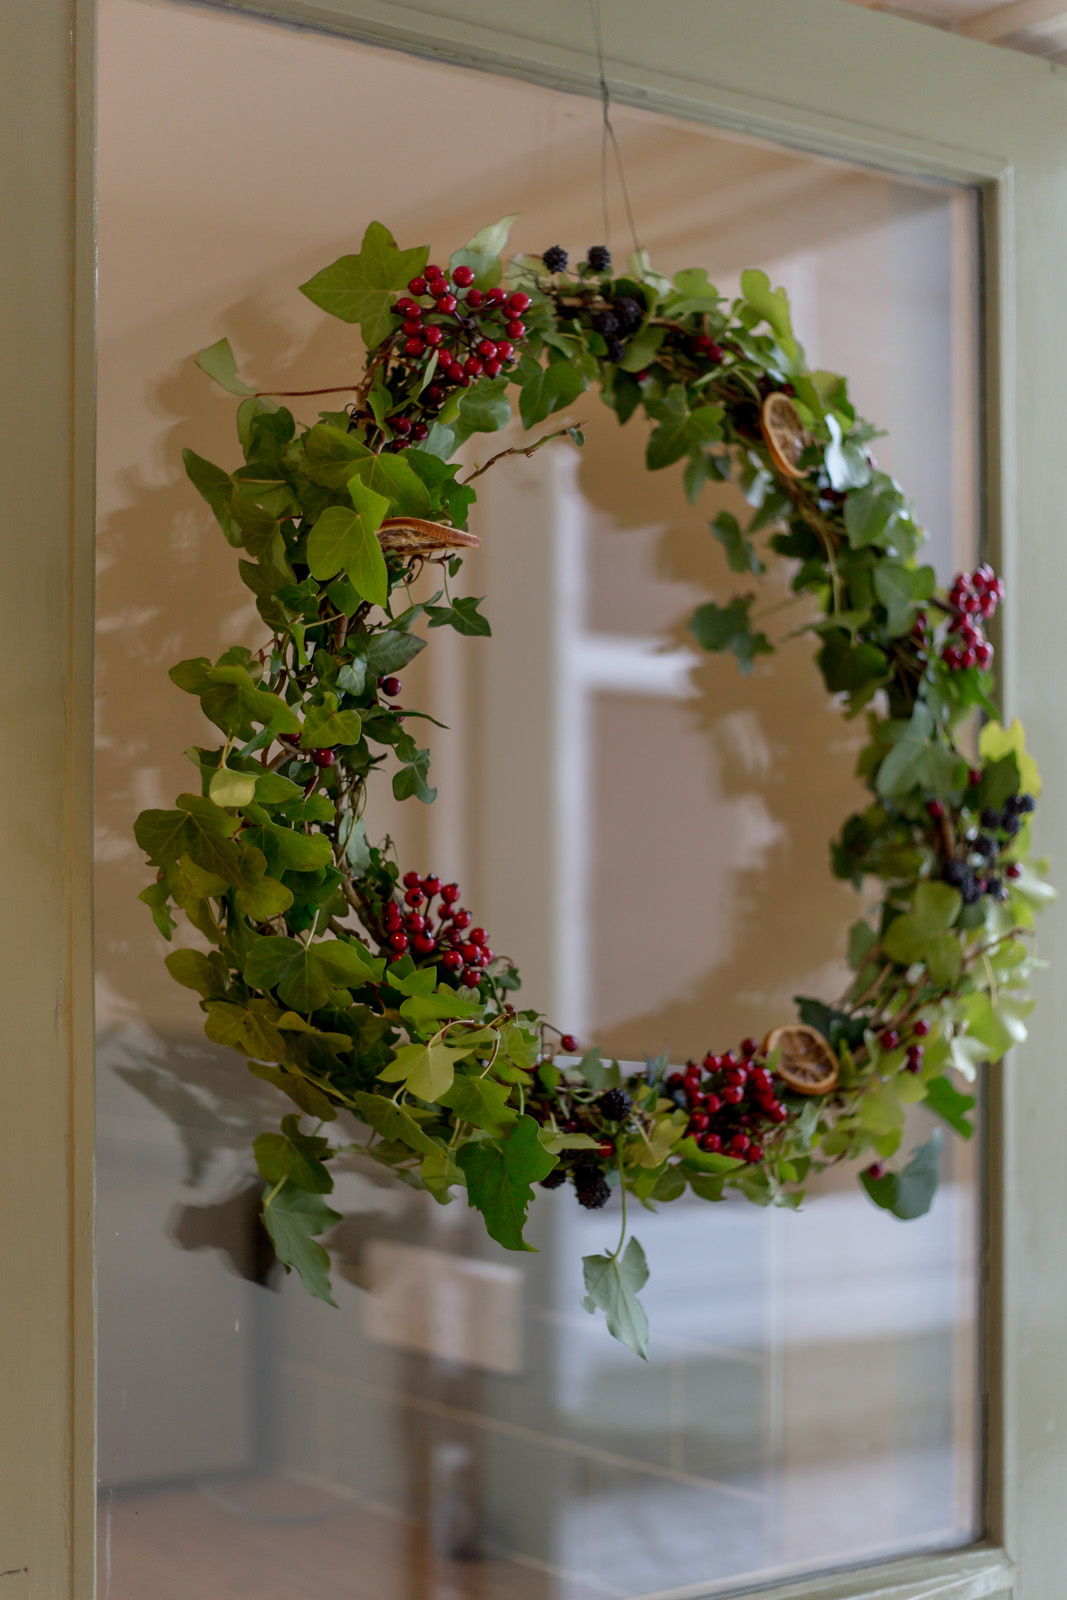 Festive wreath to welcome Christmas and New Year guests